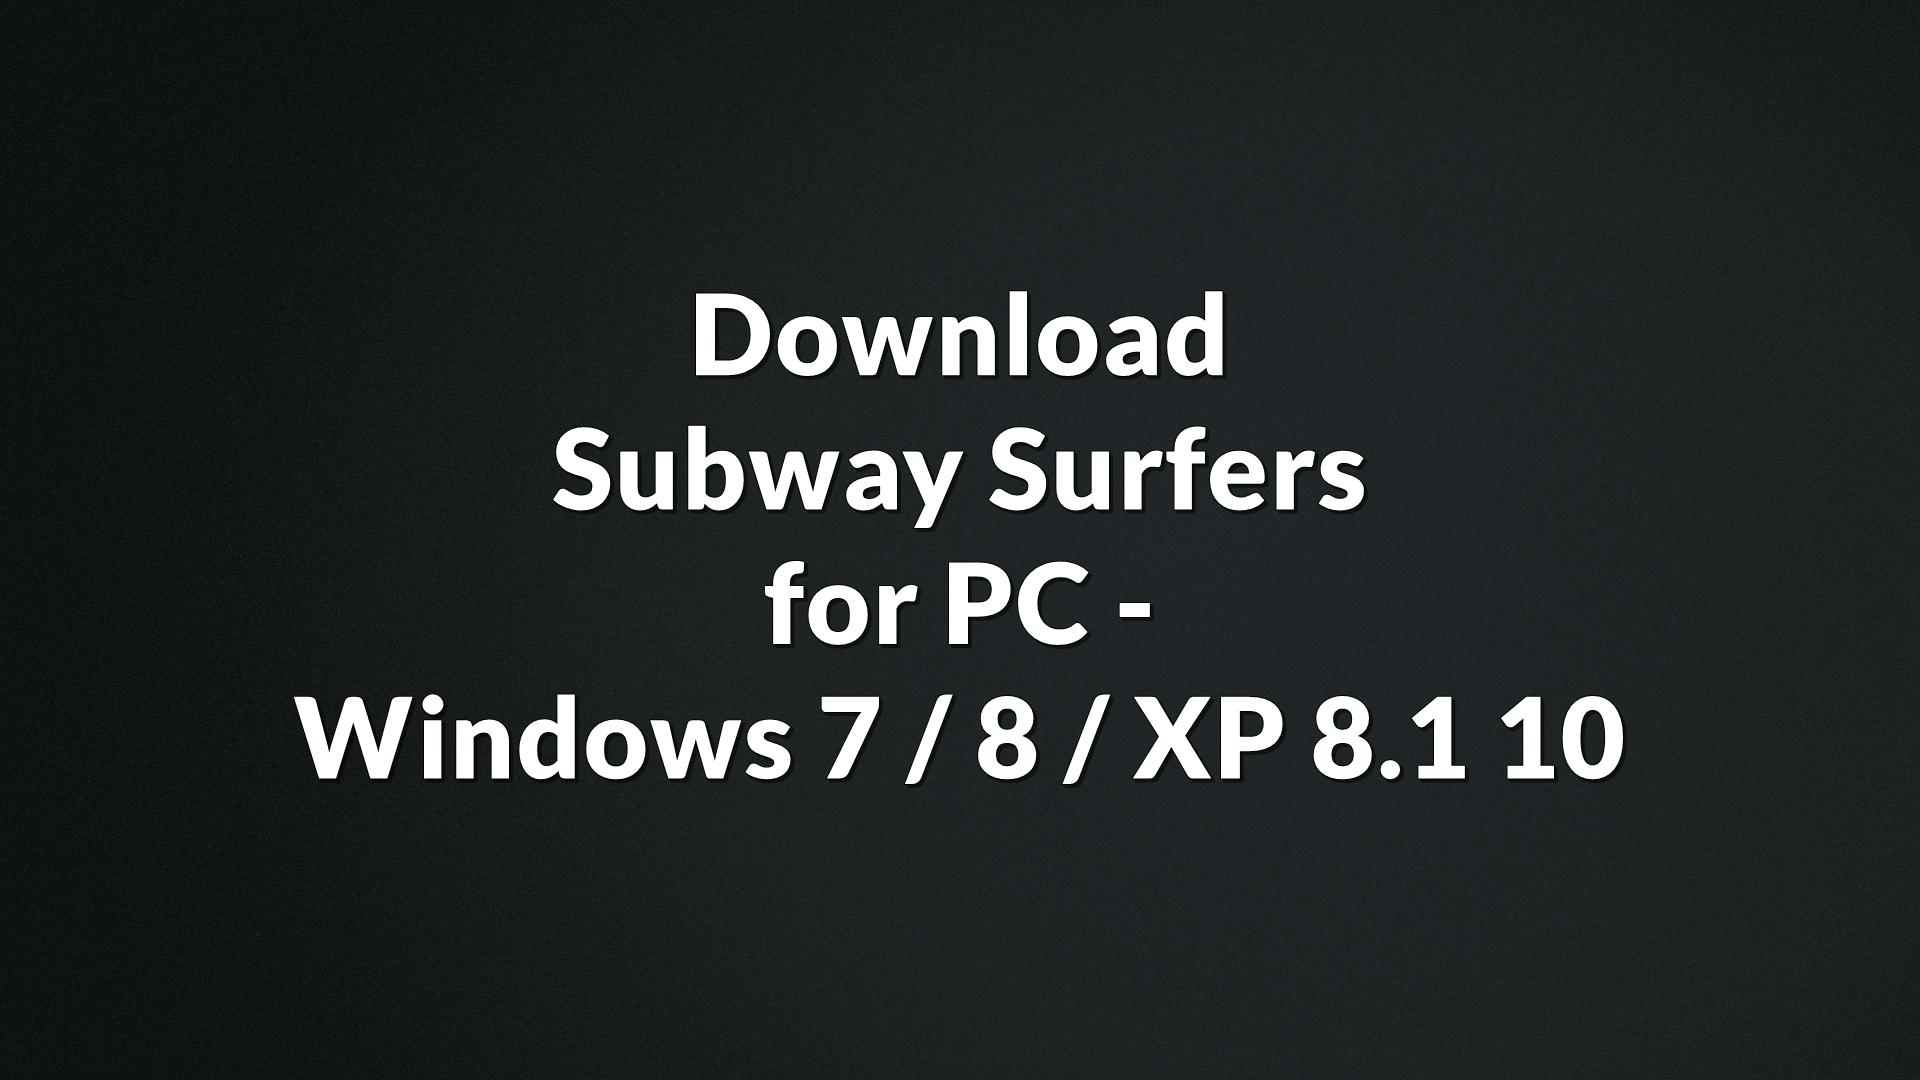 Subway Surfers Download for PC Windows 10, 7, 8 32/64 bit Free